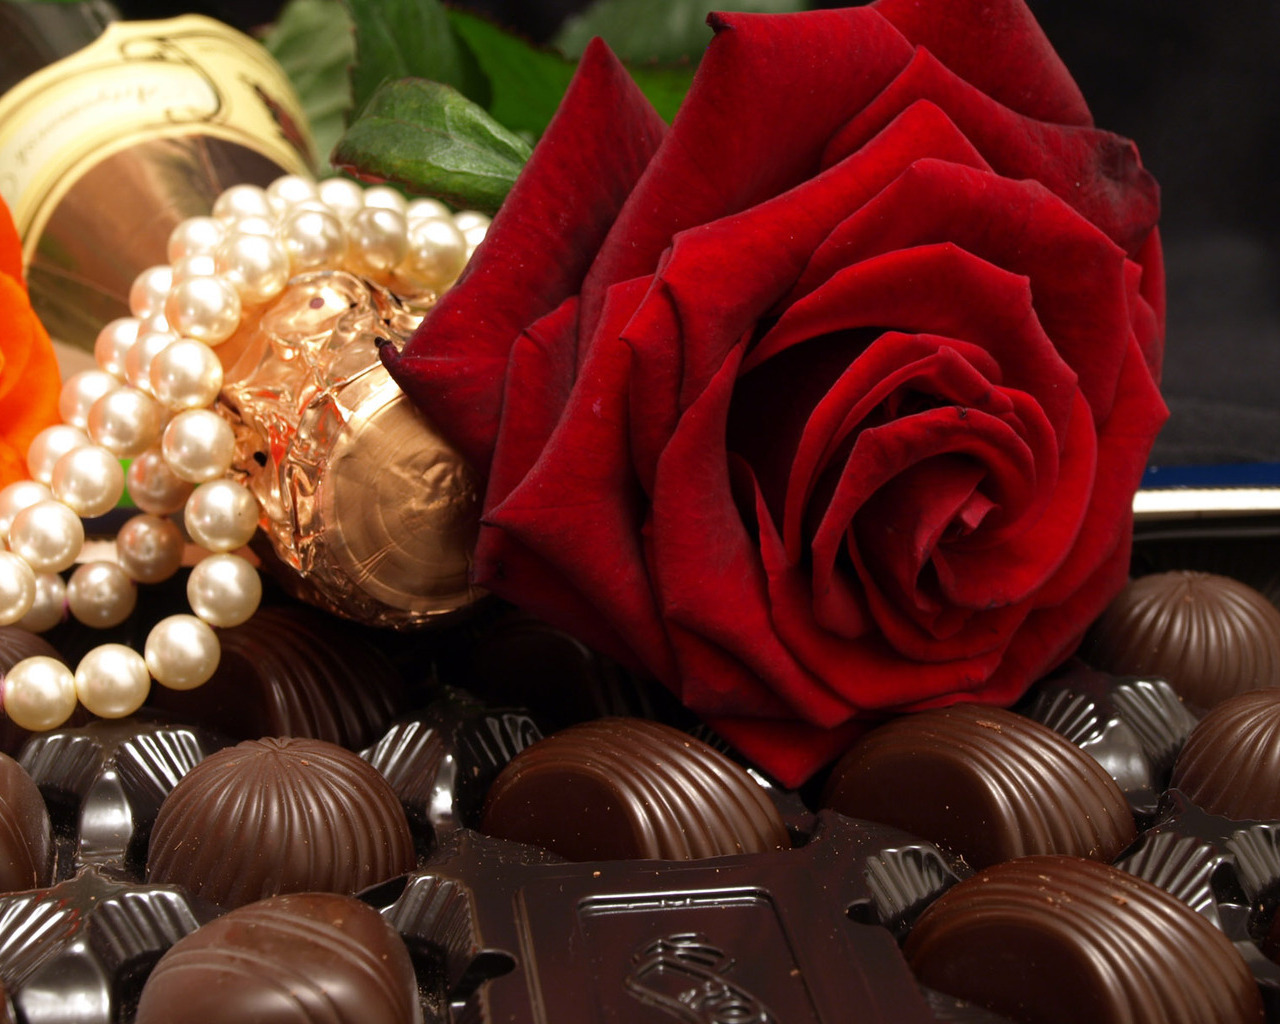 roses, holidays, flowers, food, candies